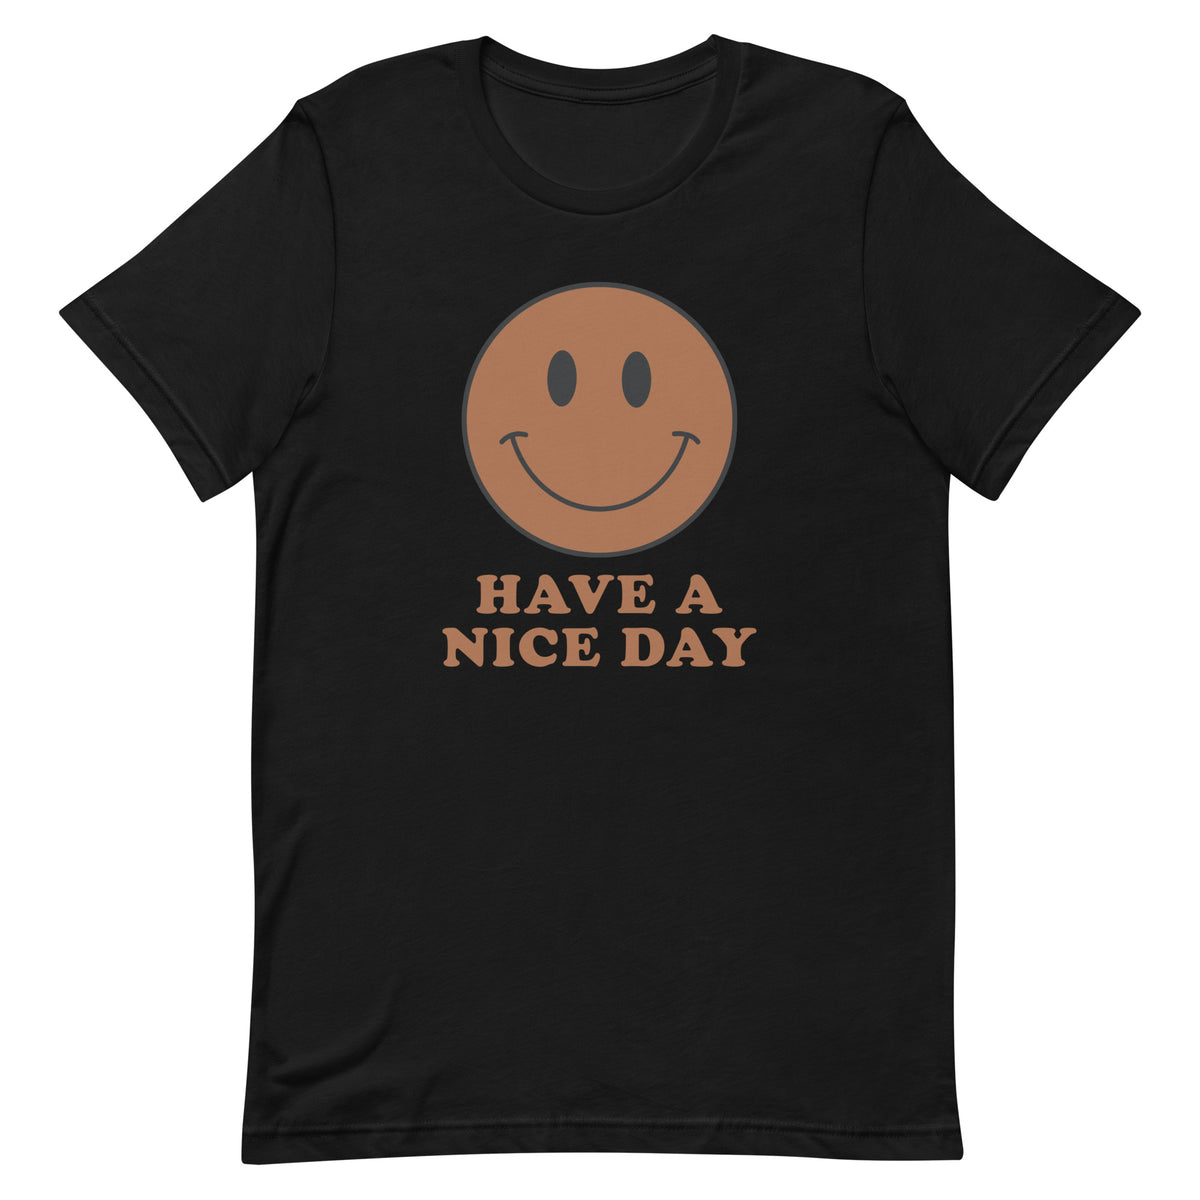 Have A Nice Day T-Shirt - Brown